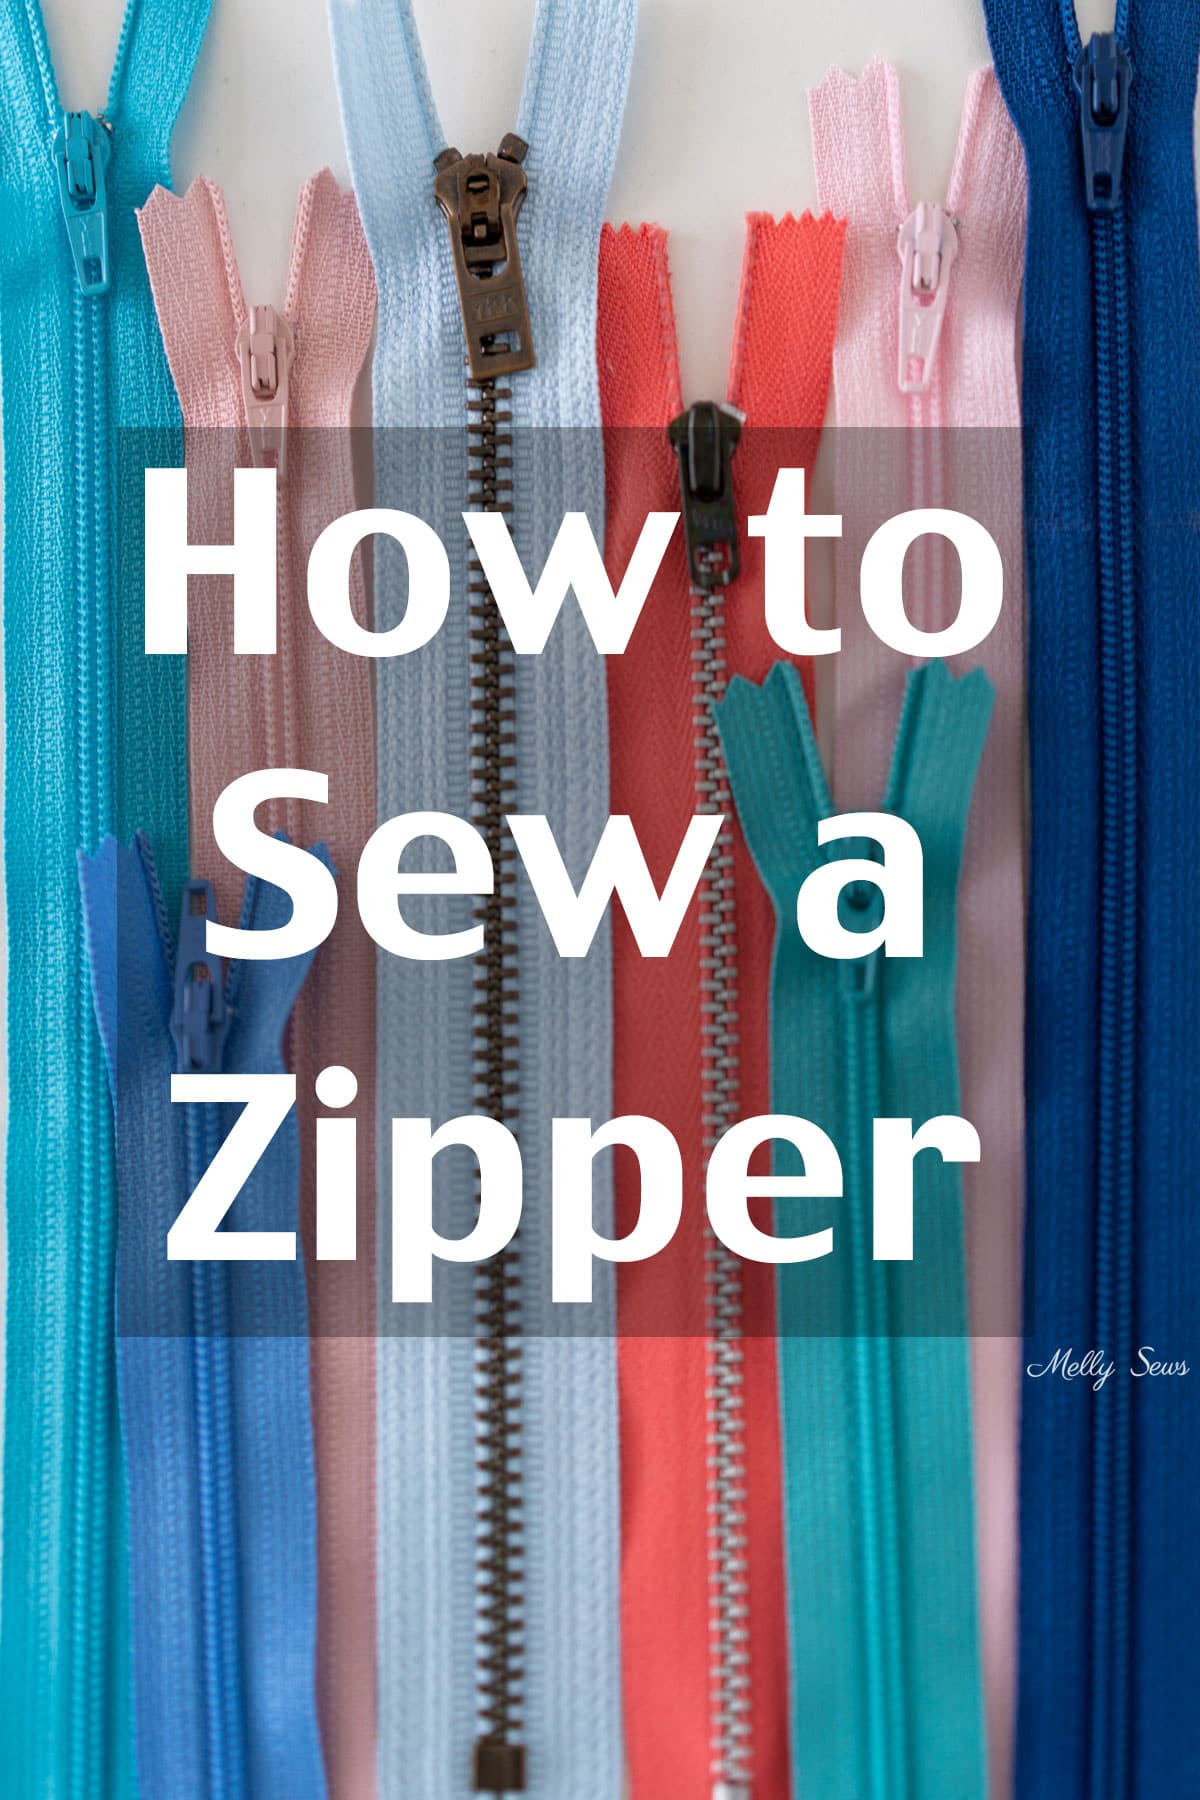 How to Sew Suspender Buttons: A Step-by-Step Tutorial